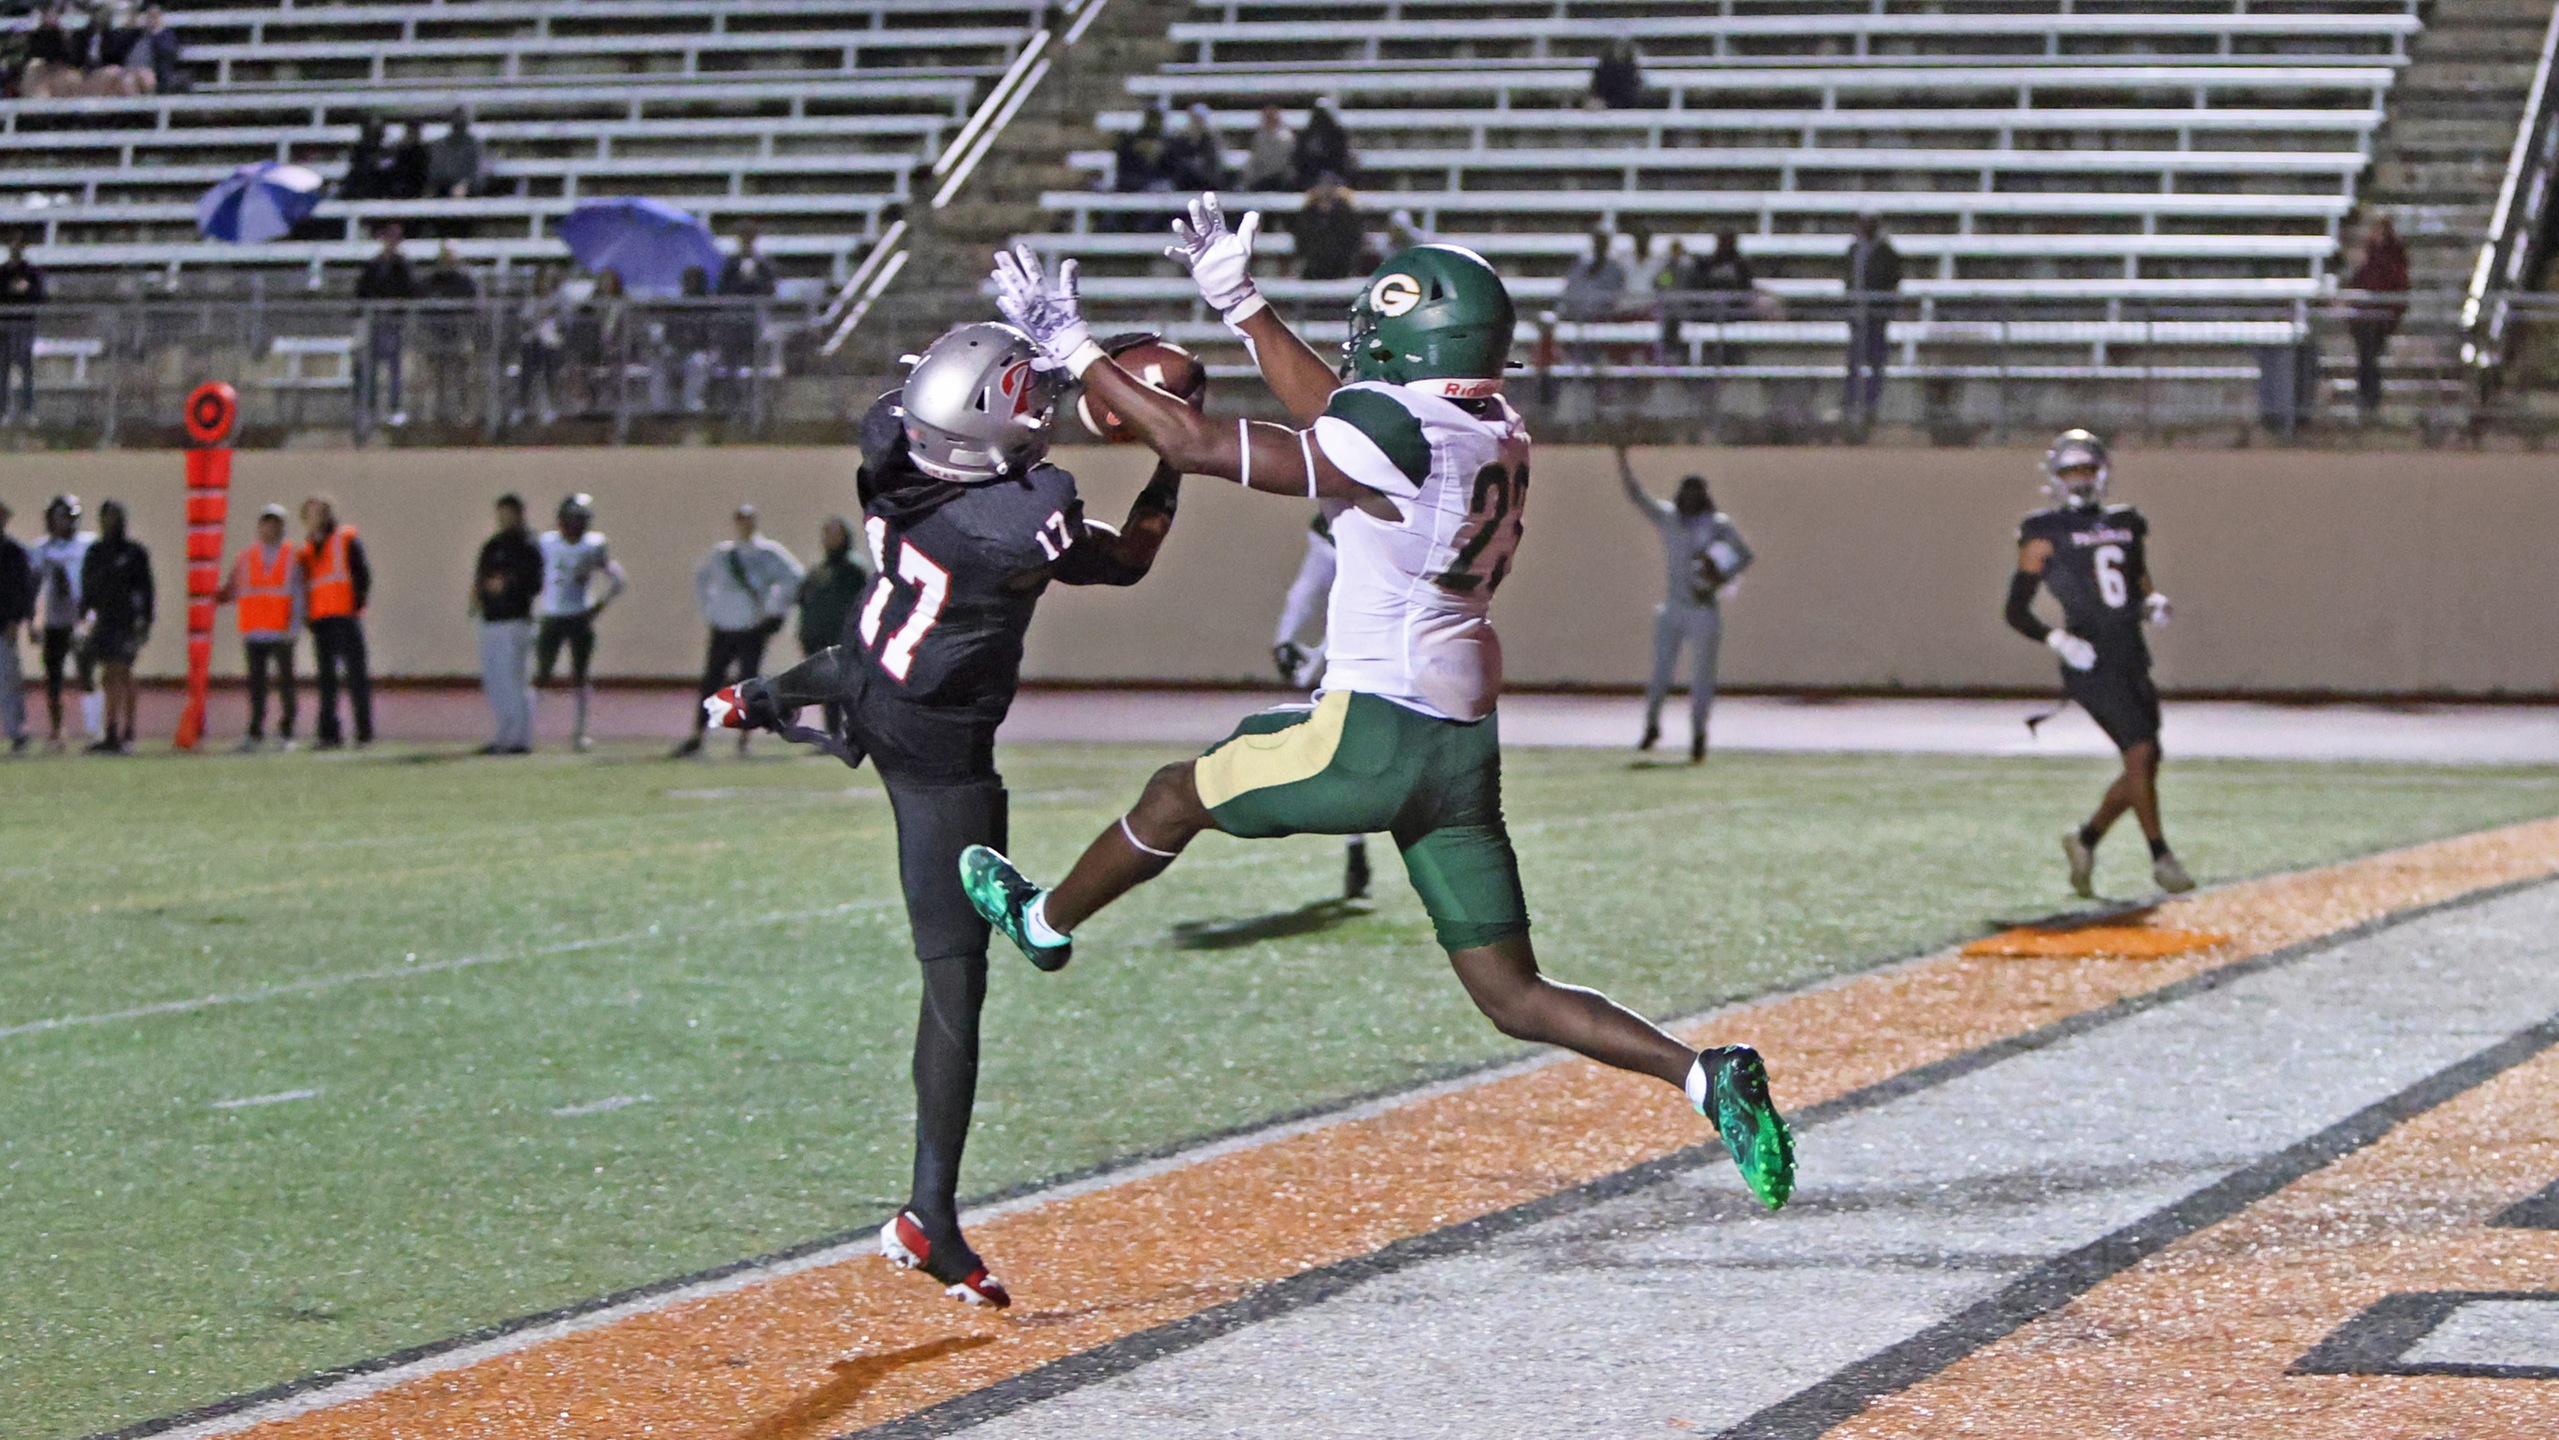 Amari Derby recorded his third touchdown of the season as the Comets took a 28-3 lead over Grossmont College. Photo by Hugh Cox.